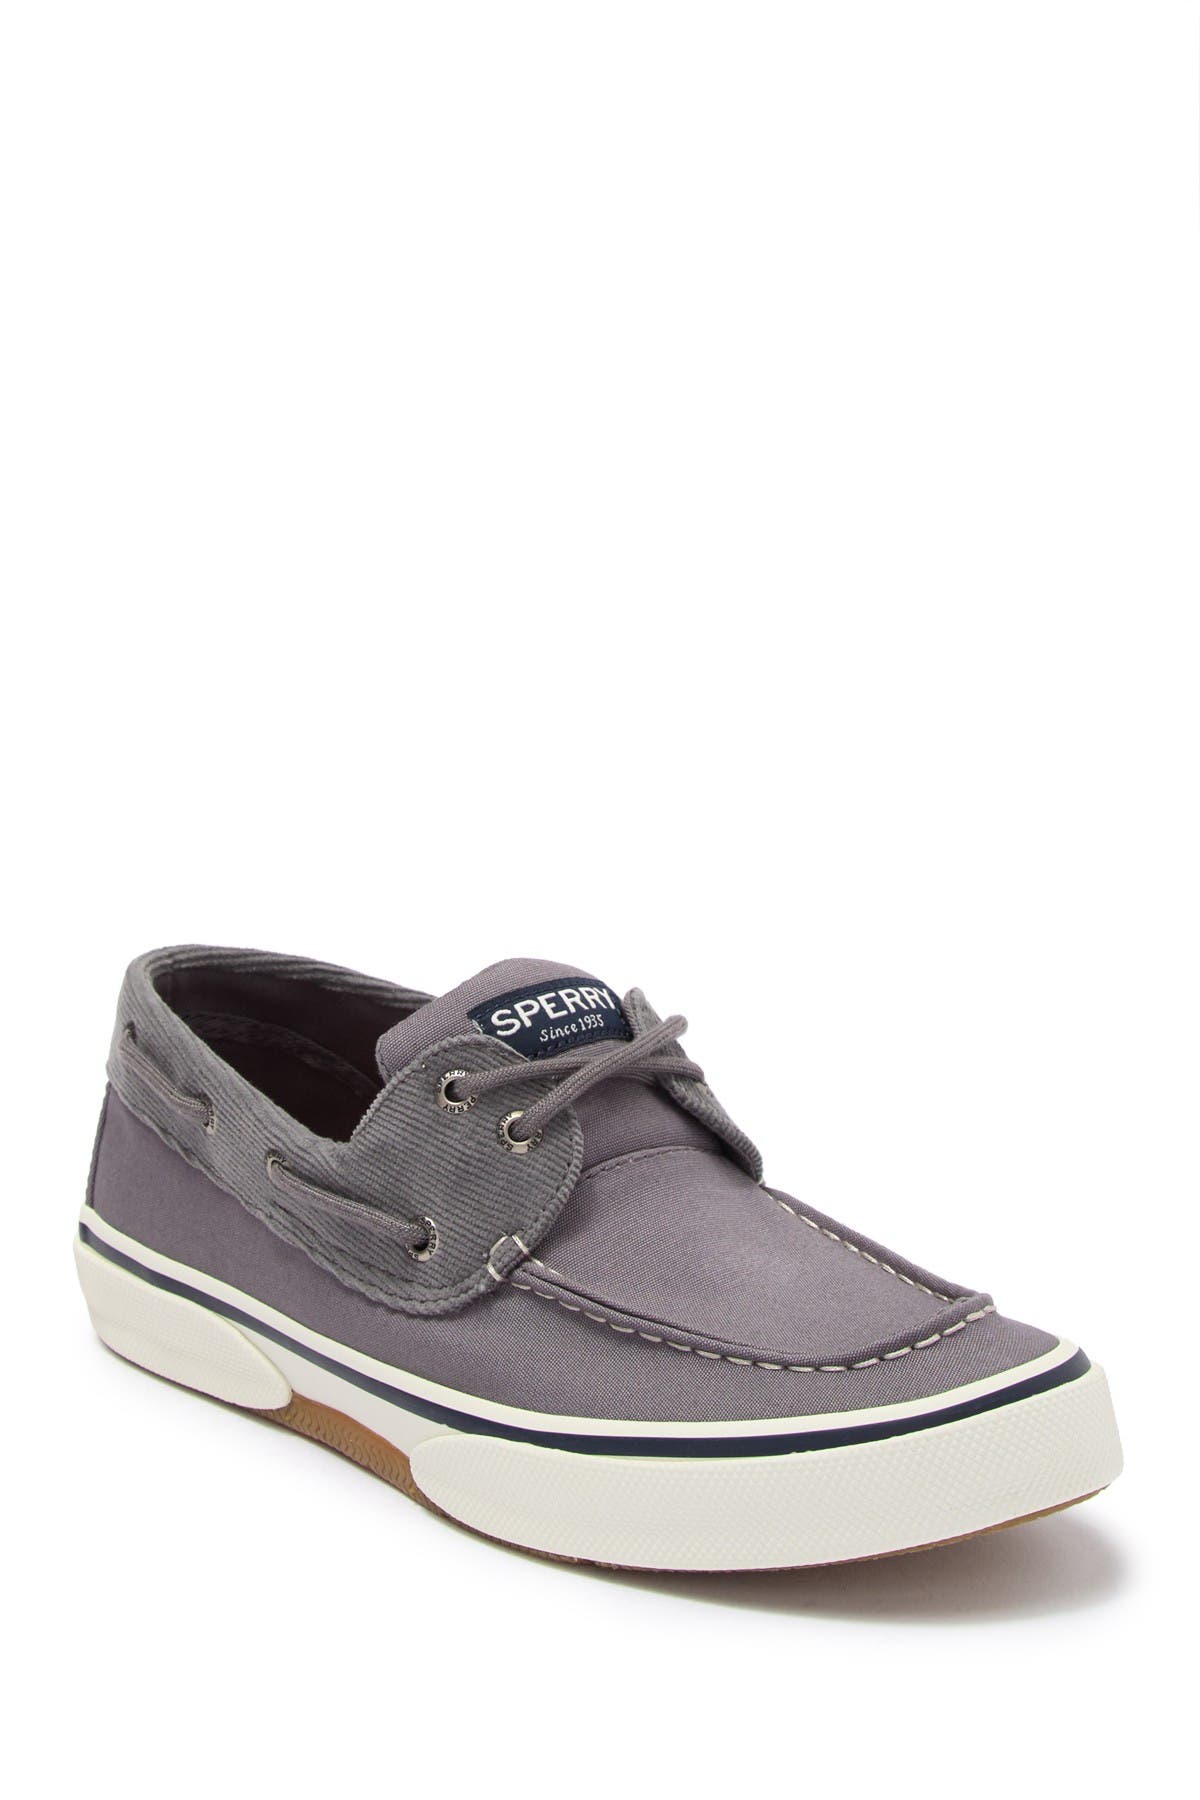 sperry boat shoes nordstrom rack